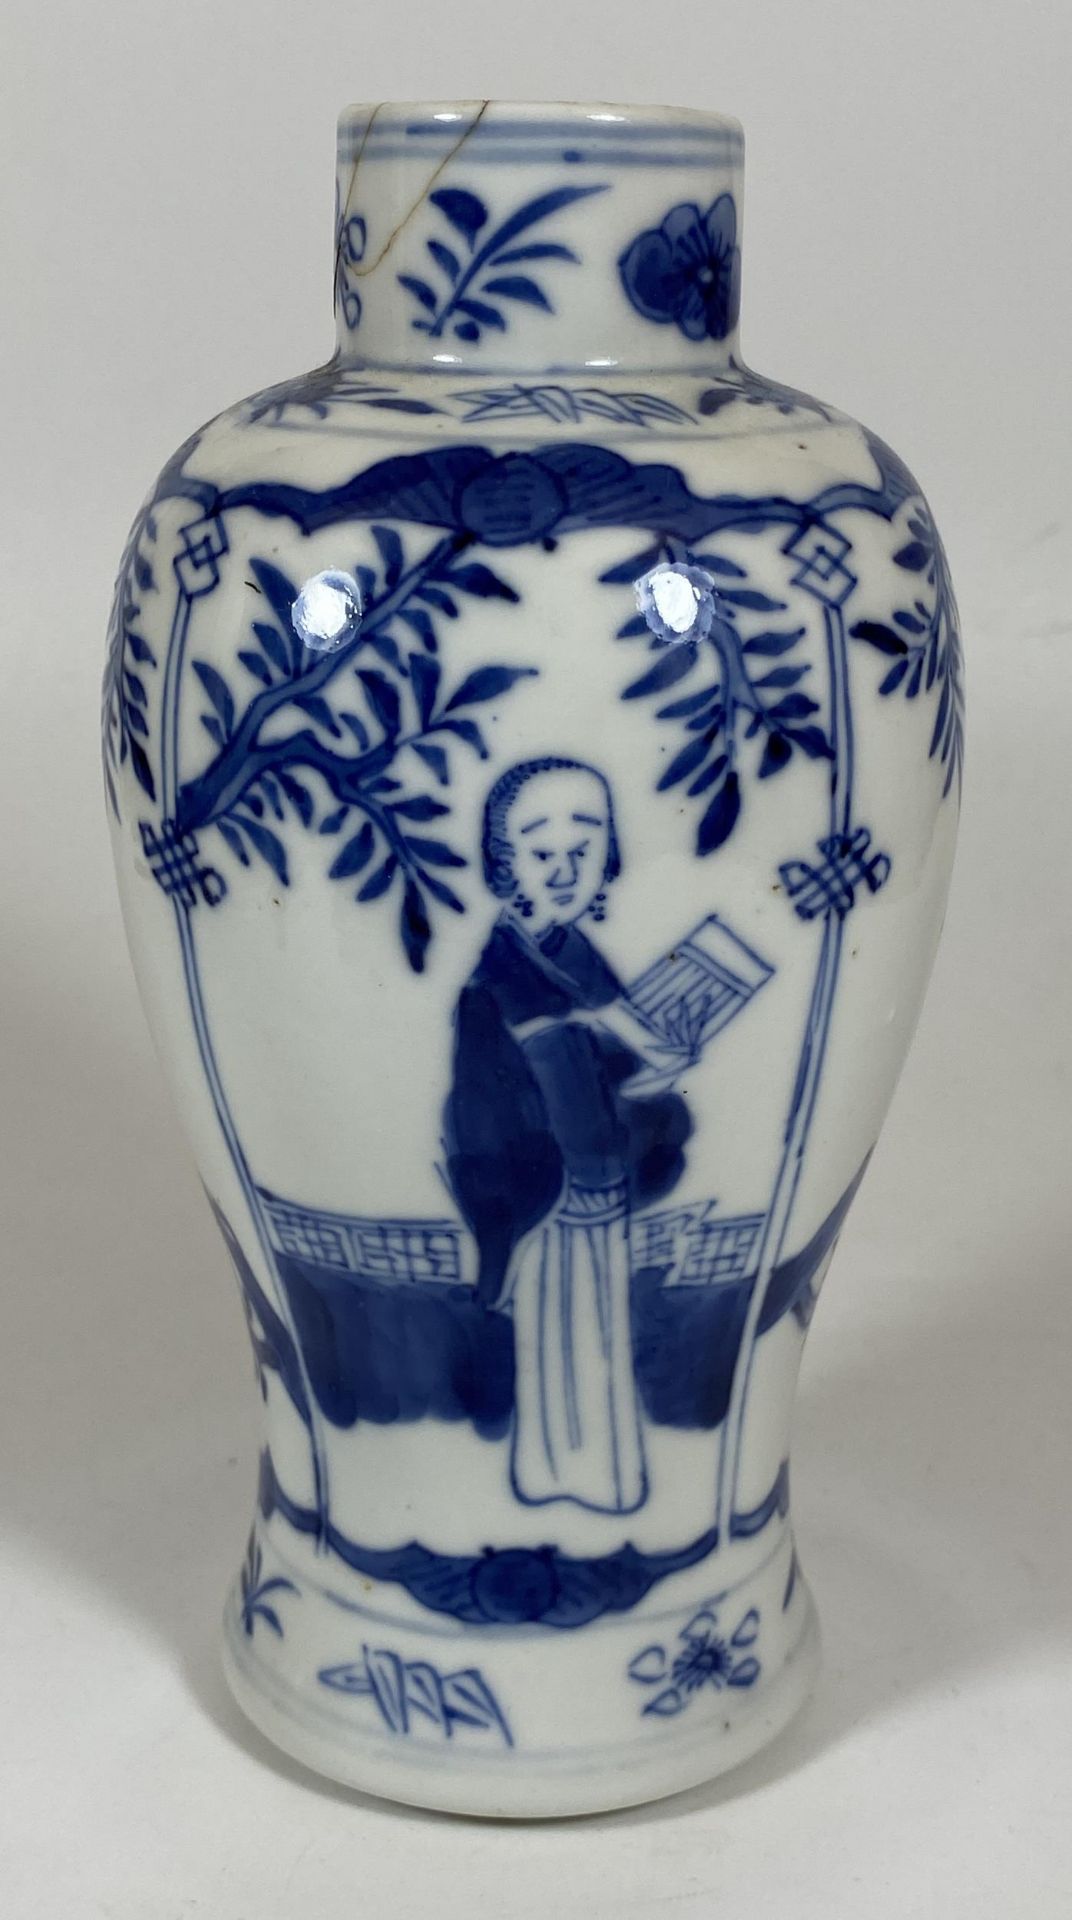 A LATE 19TH CENTURY CHINESE KANGXI STYLE BLUE AND WHITE FIGURAL DESIGN VASE, HEIGHT 18CM